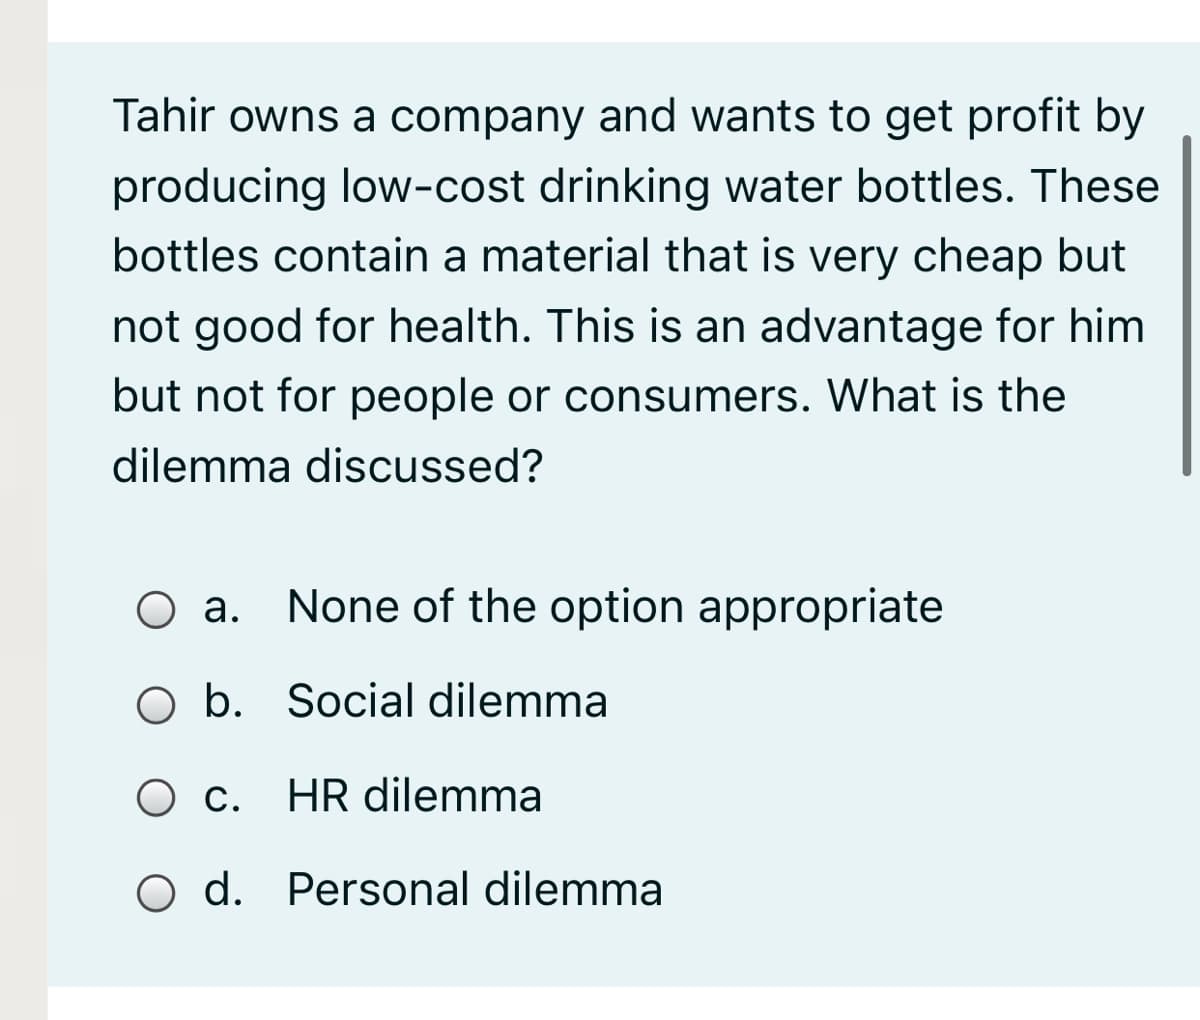 Tahir owns a company and wants to get profit by
producing low-cost drinking water bottles. These
bottles contain a material that is very cheap but
not good for health. This is an advantage for him
but not for people or consumers. What is the
dilemma discussed?
Оа.
None of the option appropriate
O b. Social dilemma
Ос.
HR dilemma
O d. Personal dilemma
